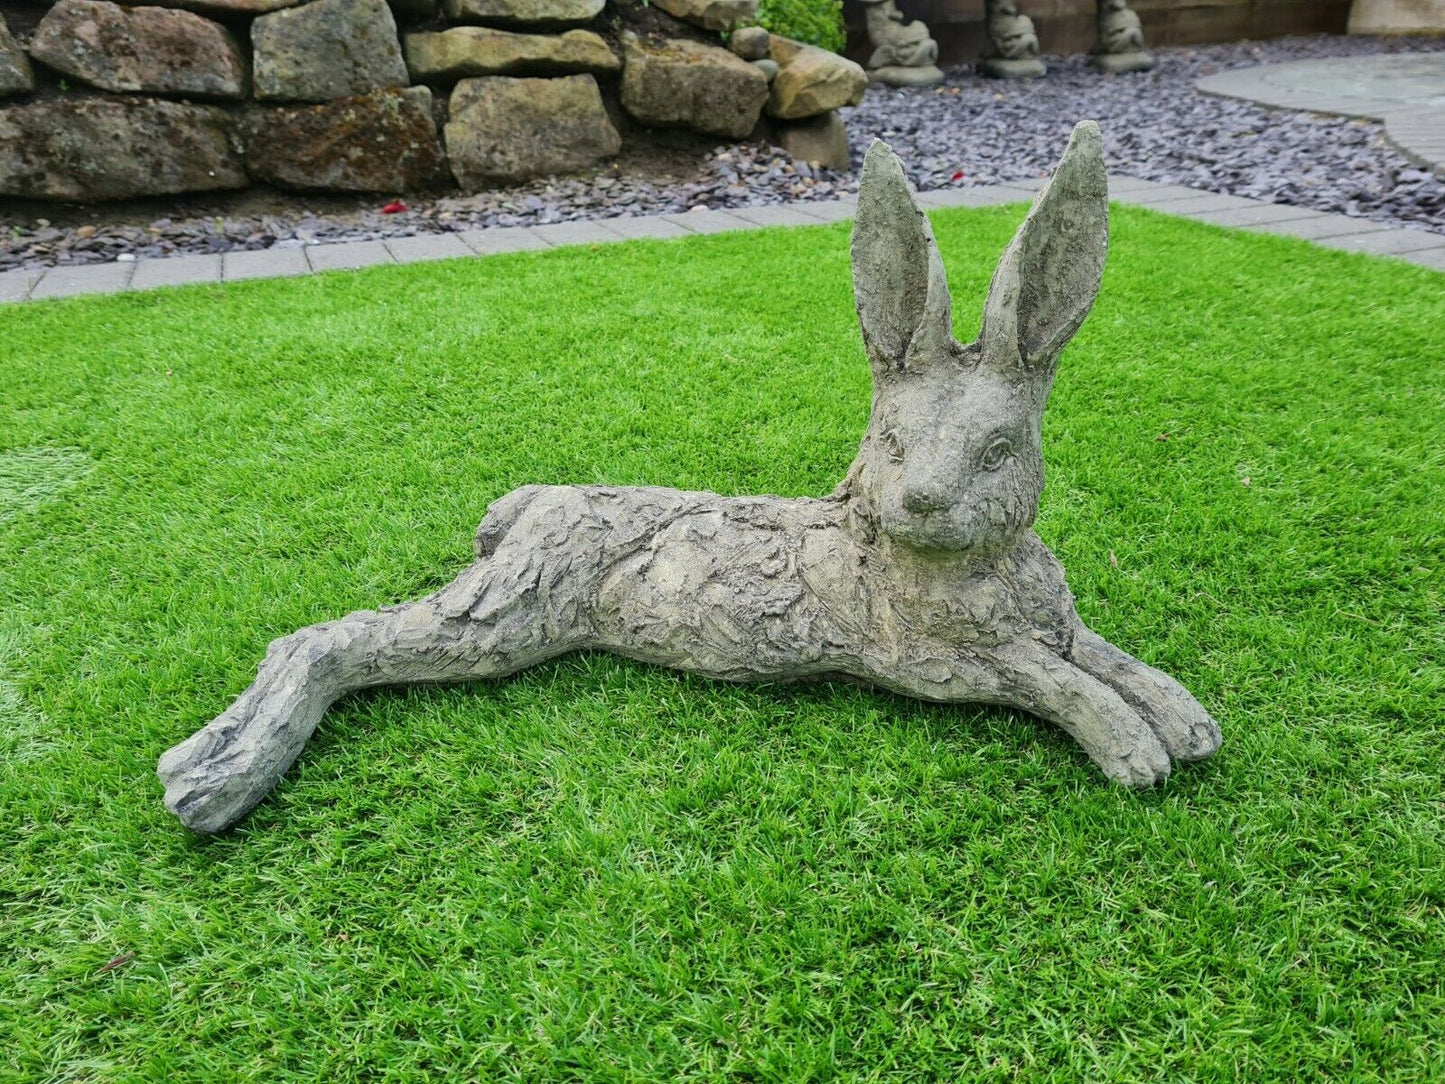 Hampshire Hare garden ornament - DELIVERY INCLUDED